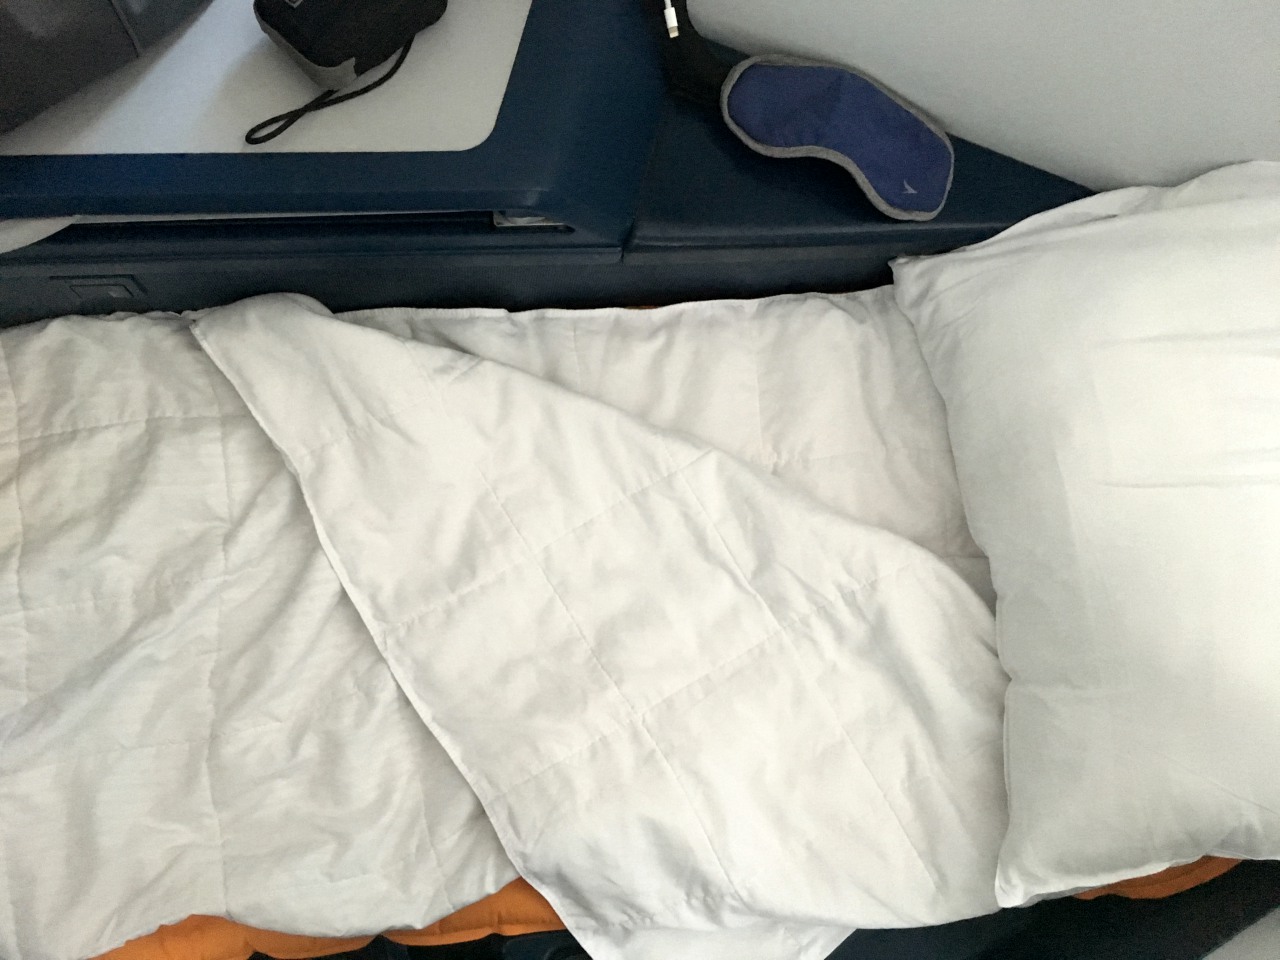 Delta One A330 Review: Flat Bed with Westin Heavenly Bedding